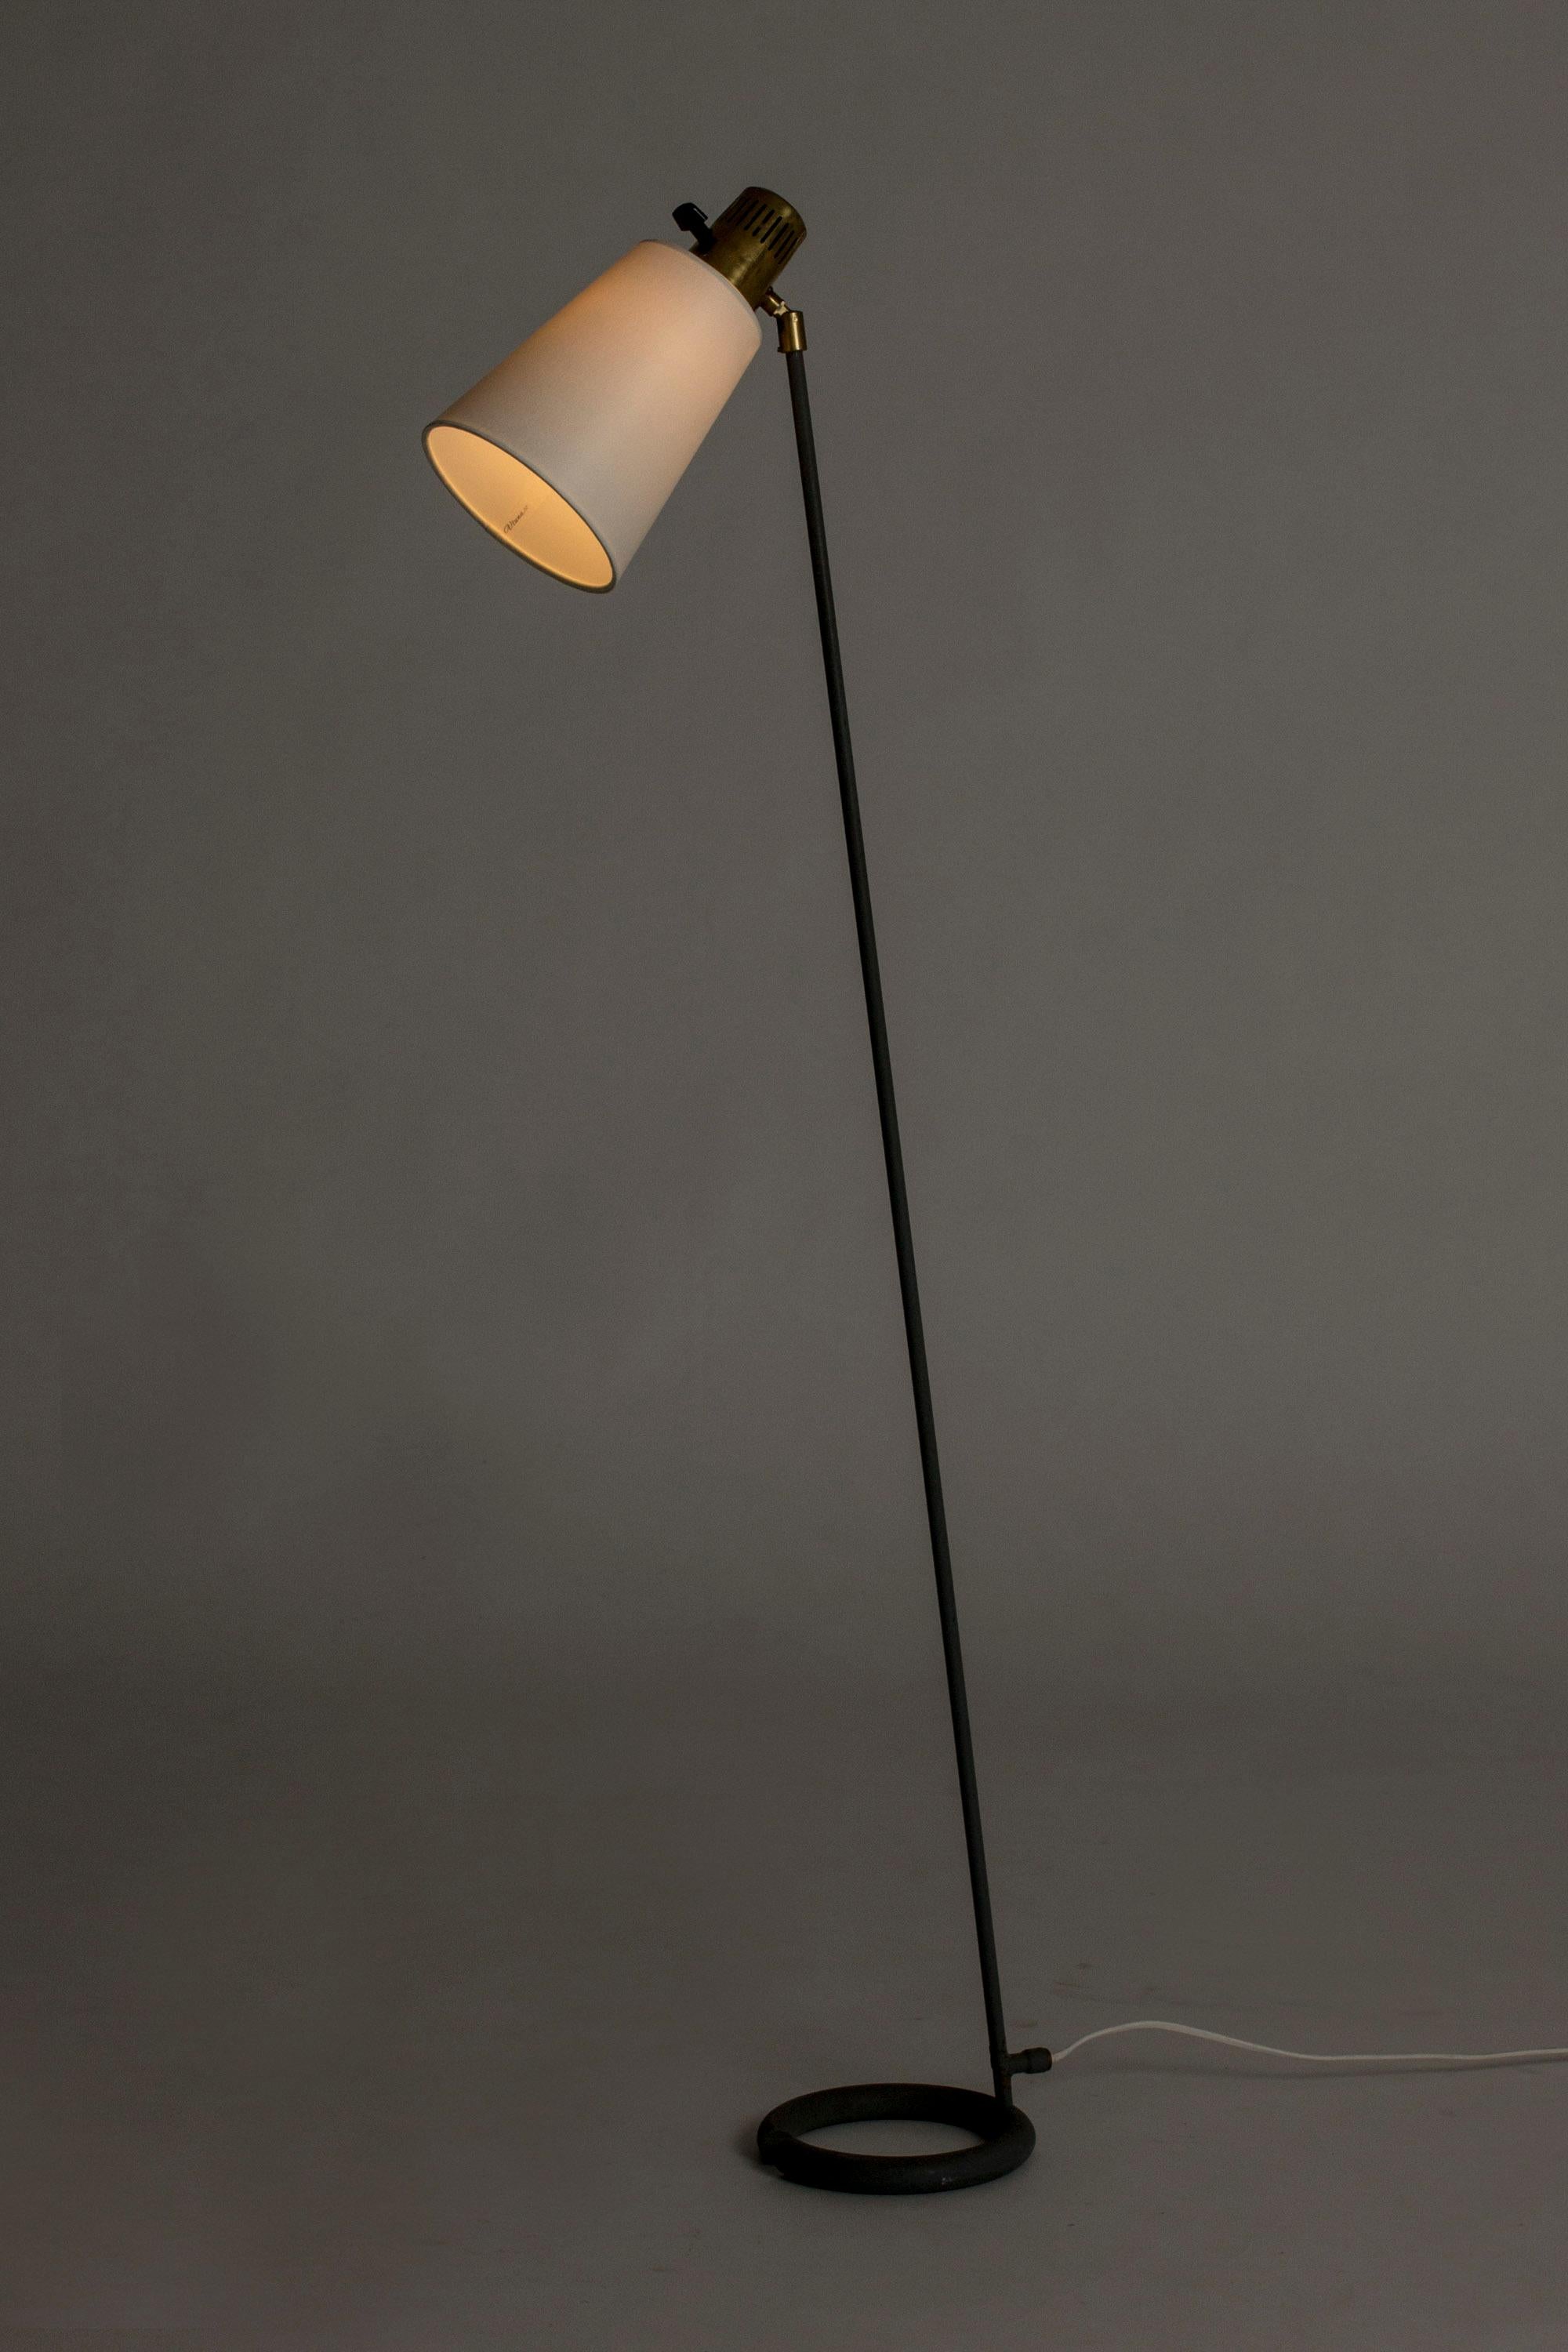 Cool floor lamp by Hans Bergström, made from metal with a greyish blue lacquer. Heavy base in a circular form contrasts with the slender handle.